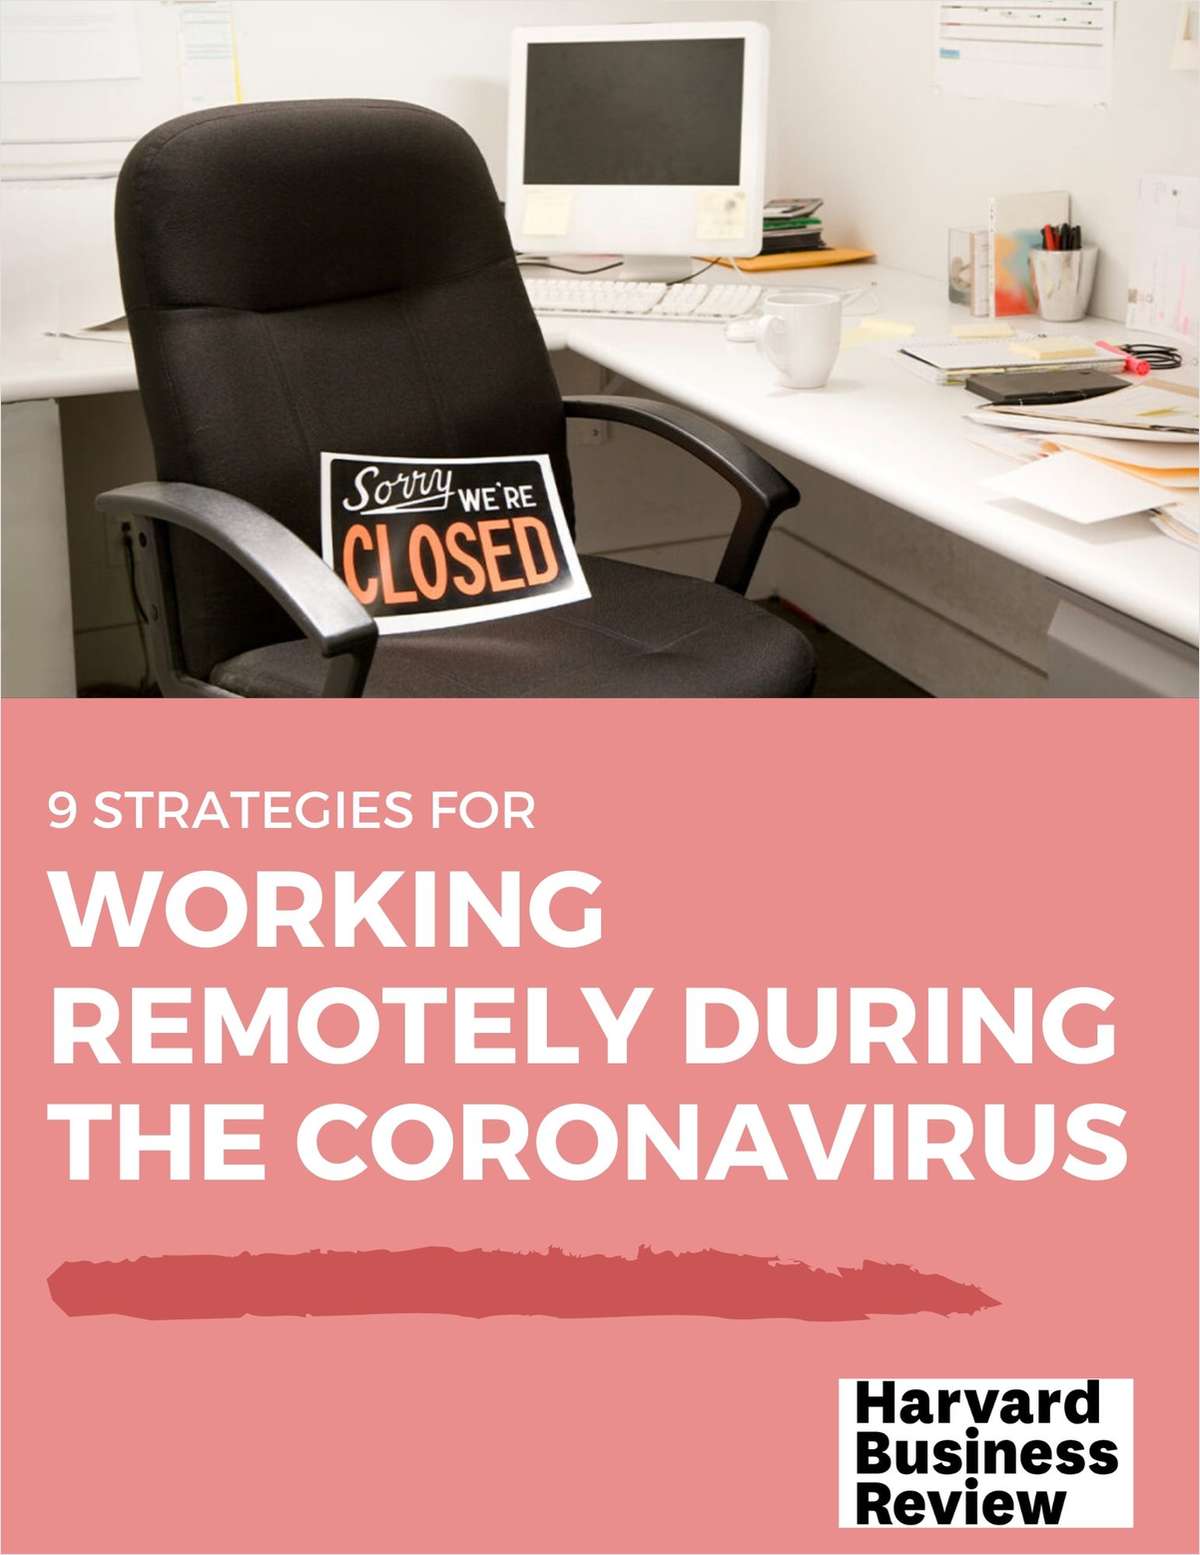 9 Strategies for Working Remotely During the Coronavirus